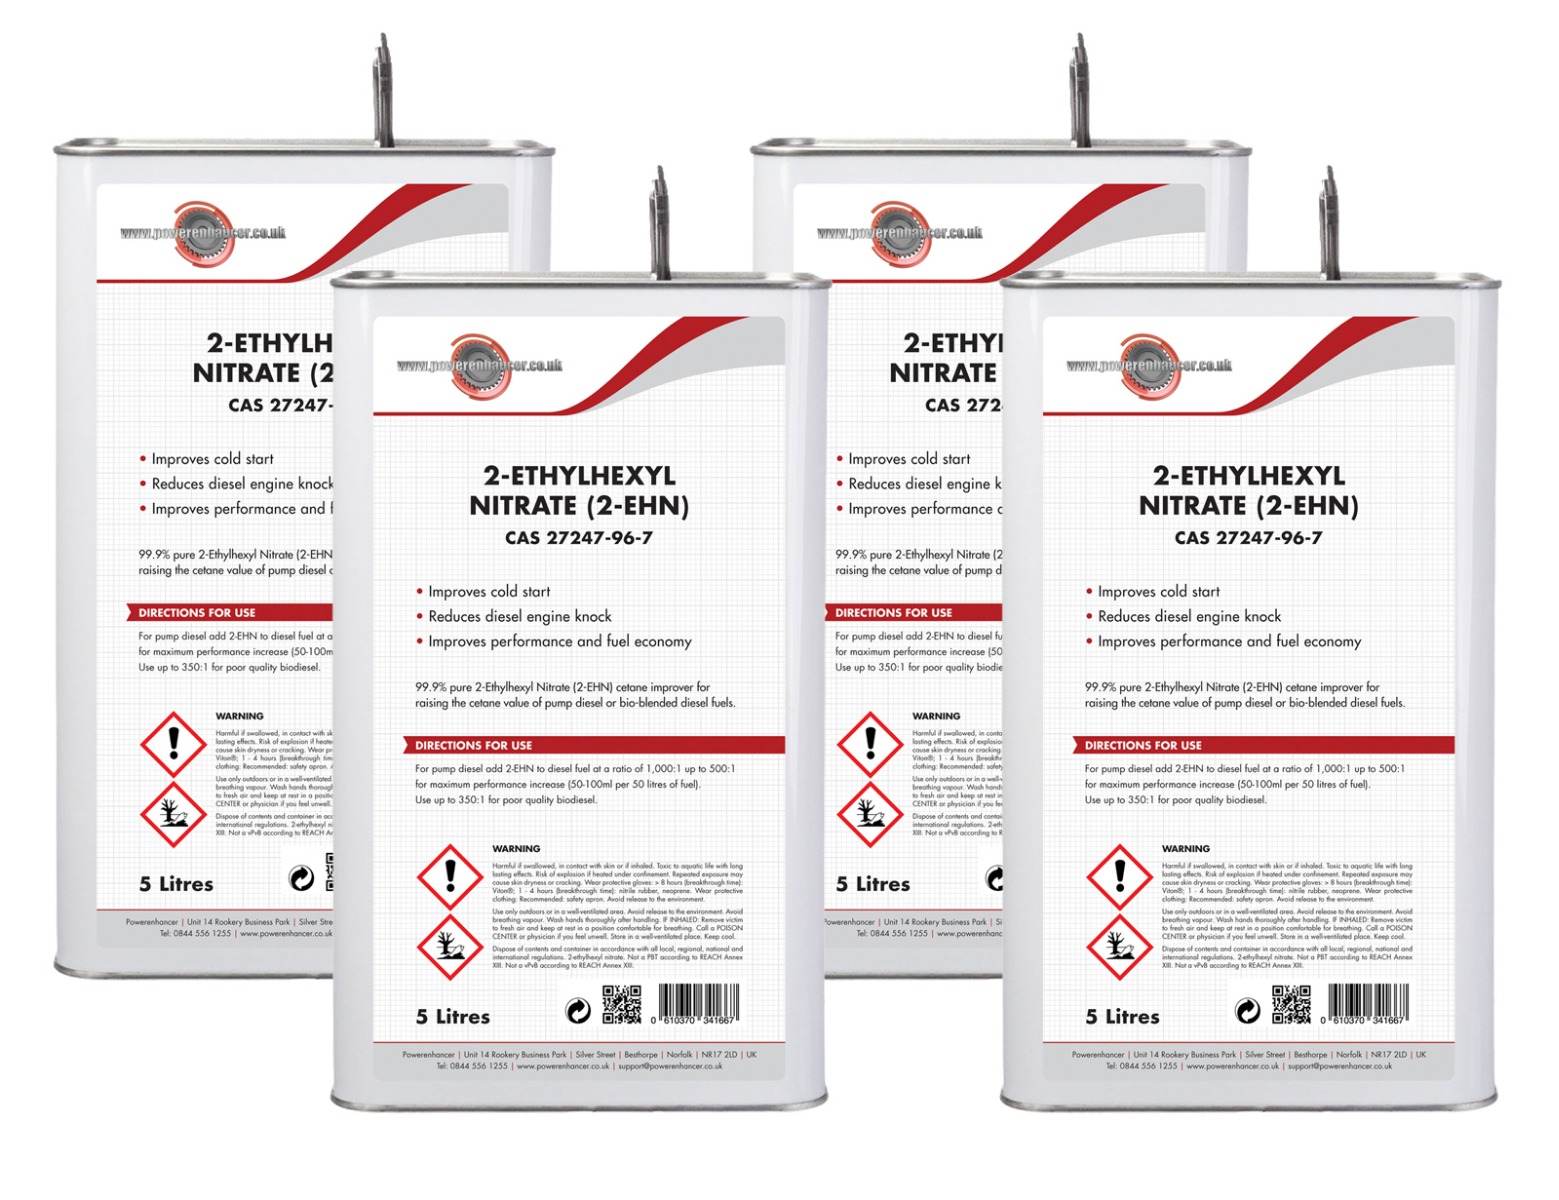 4 x 2-EHN Highest quality 99% pure 2-Ethyl-Hexyl Nitrate Cetane Booster - 5 Litres